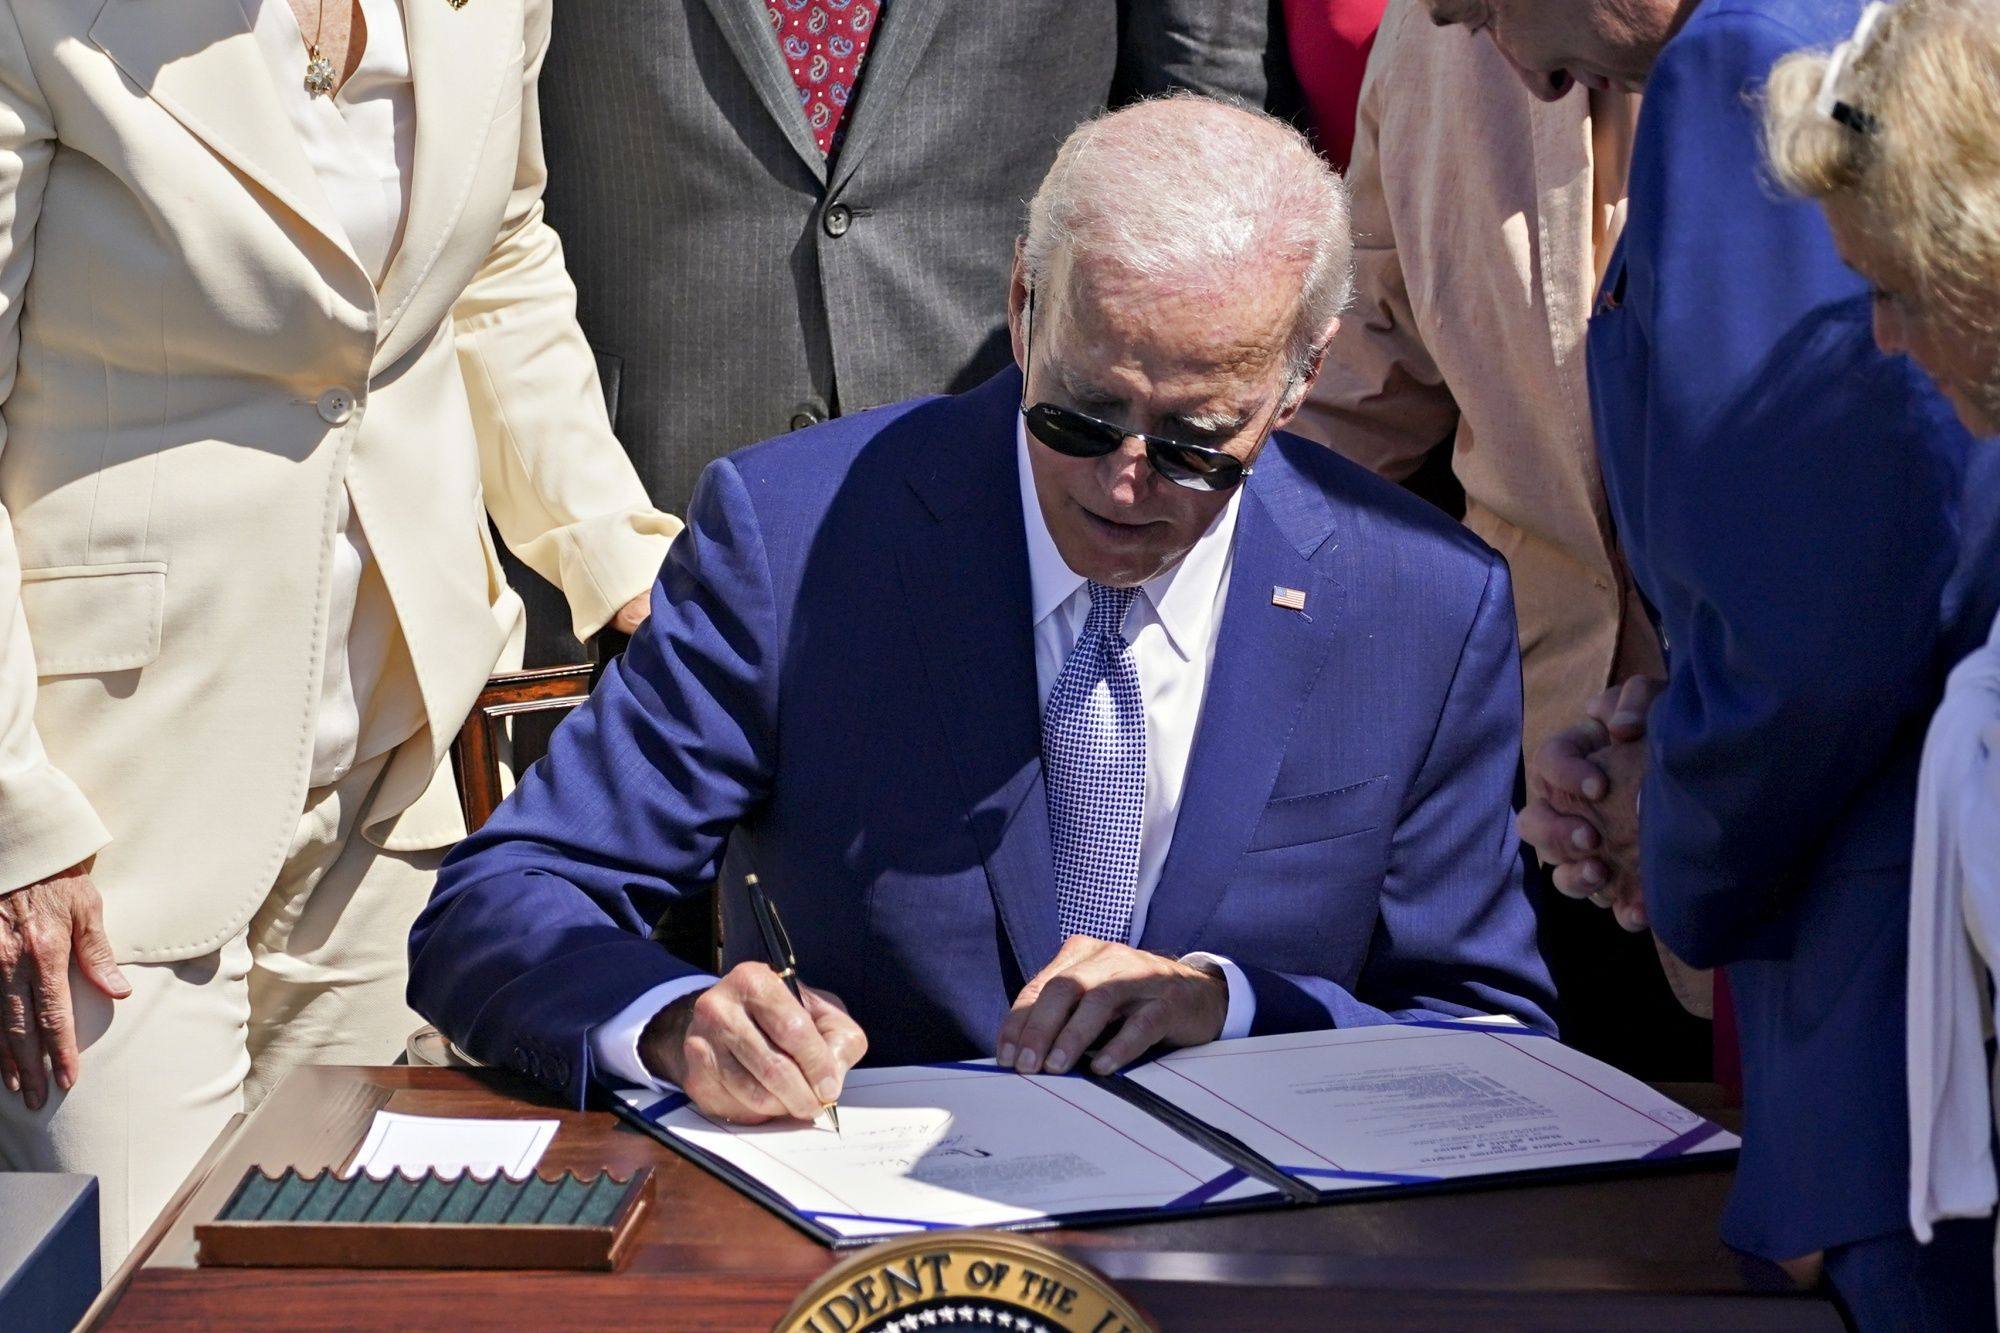 US President Joe Biden signs the Chips and Science Act of 2022 during a ceremony on the South Lawn of the White House on August 9. Photo: Bloomberg